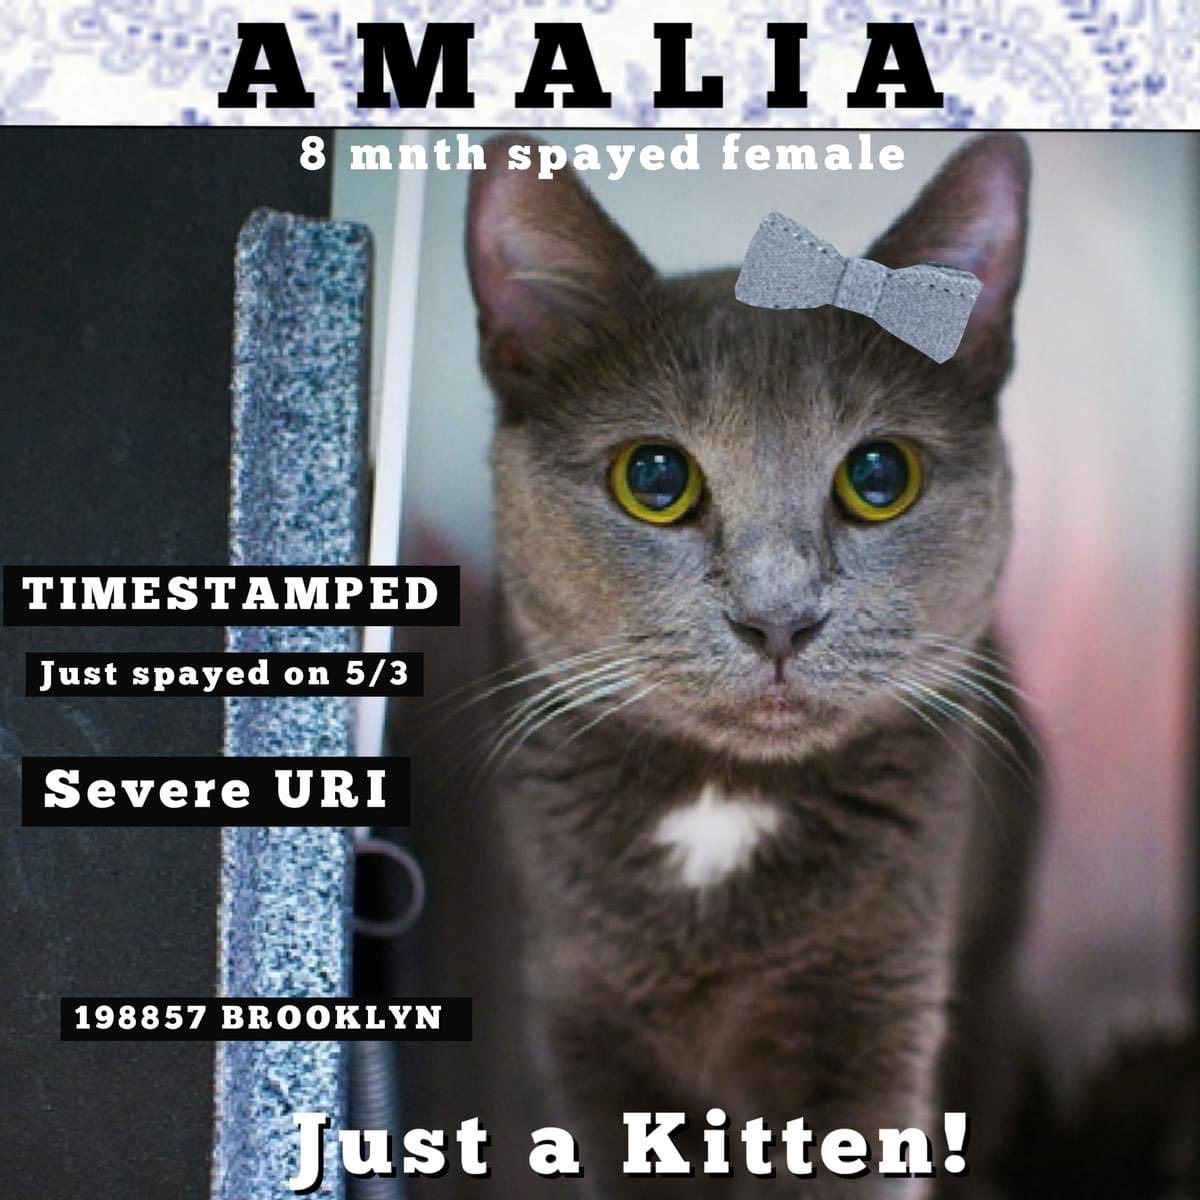 🆘Please RT-adopt-foster! 🆘 AMALIA is on the “emergency placement” list at #ACCNYC and needs out of the shelter by 12 NOON 5/9! #URGENT #NYC #CATS #NYCACC #TeamKittySOS #AdoptDontShop #CatsOfTwitter newhope.shelterbuddy.com/Animal/Profile…